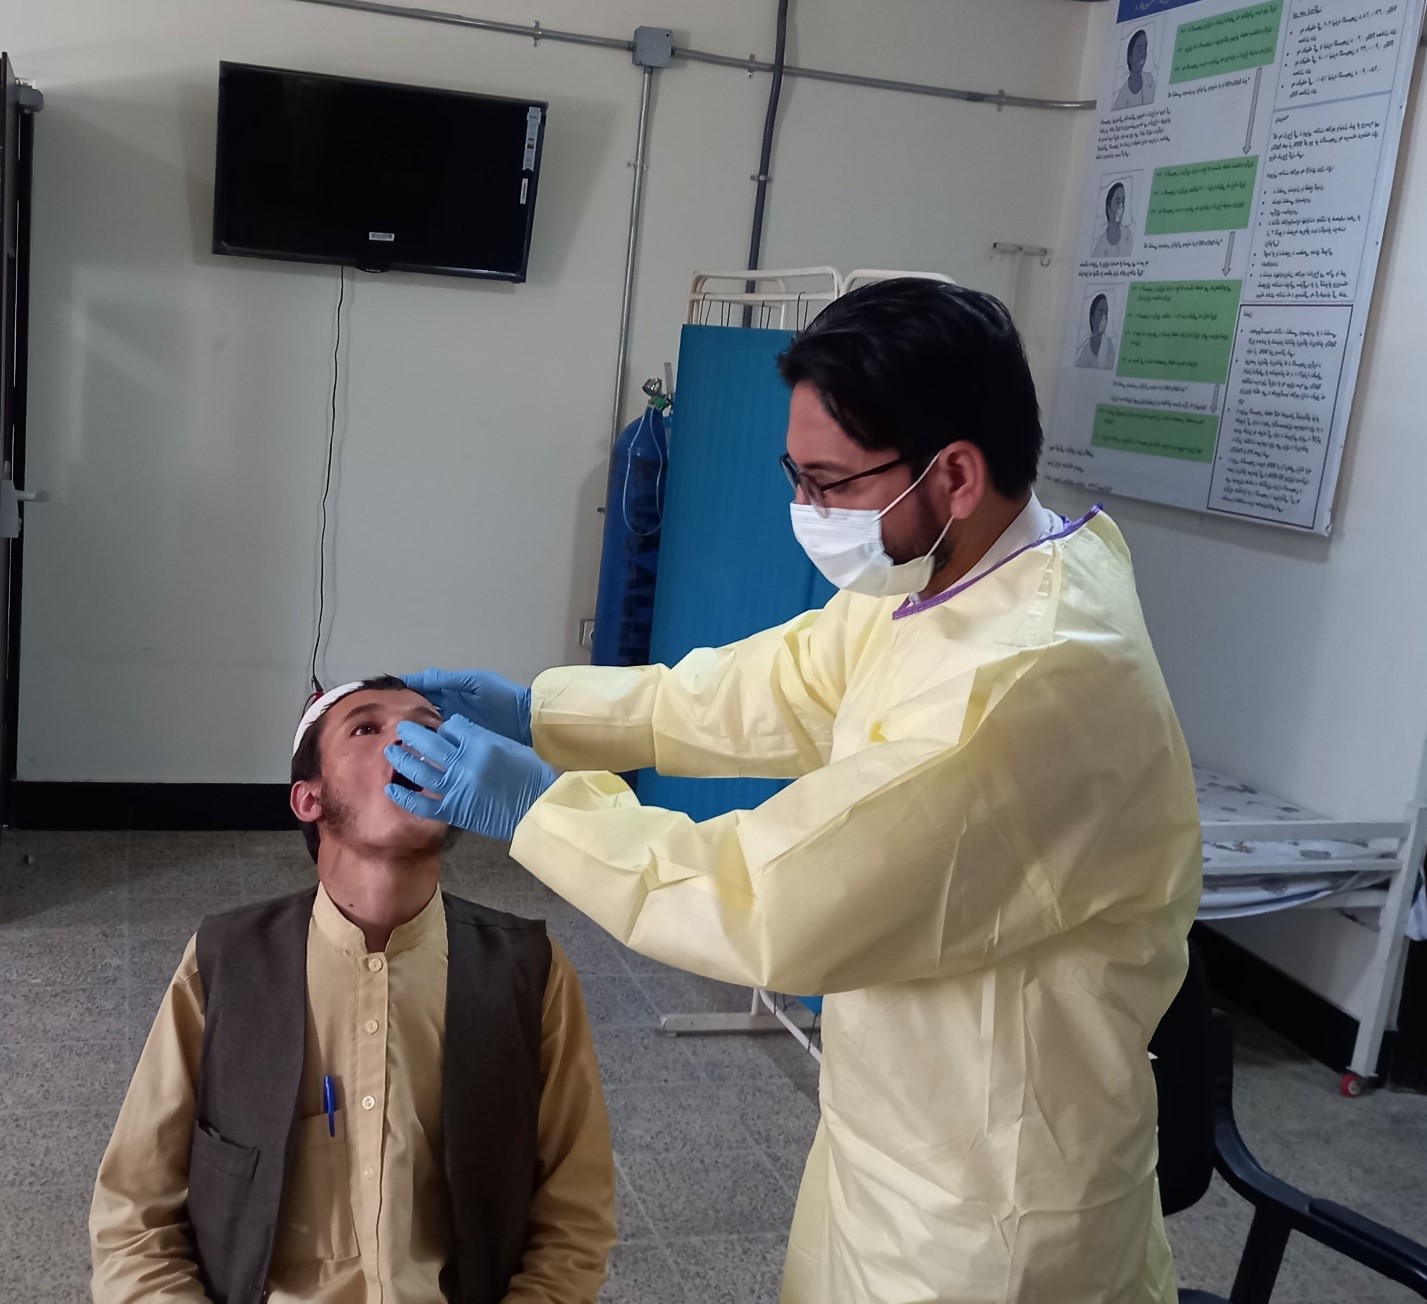 giving-sample-for-COVID-19-testing-at-the-confirmatory-laboratory-in-Kunduz-province